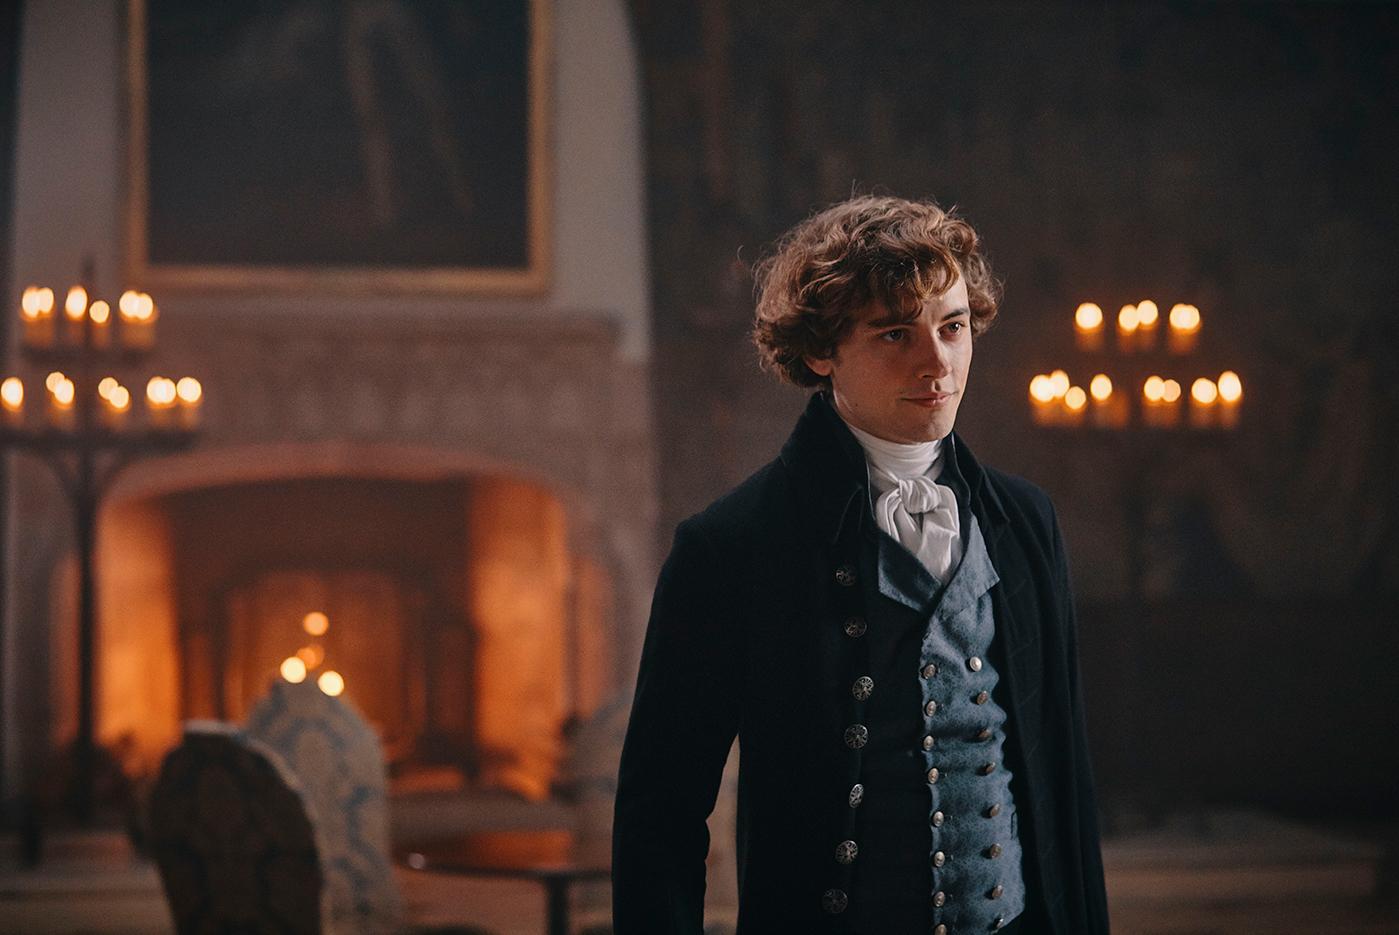 Josh Whitehouse as Hugh Armitage in Poldark. Photo: Mammoth Screen for BBC and MASTERPIECE